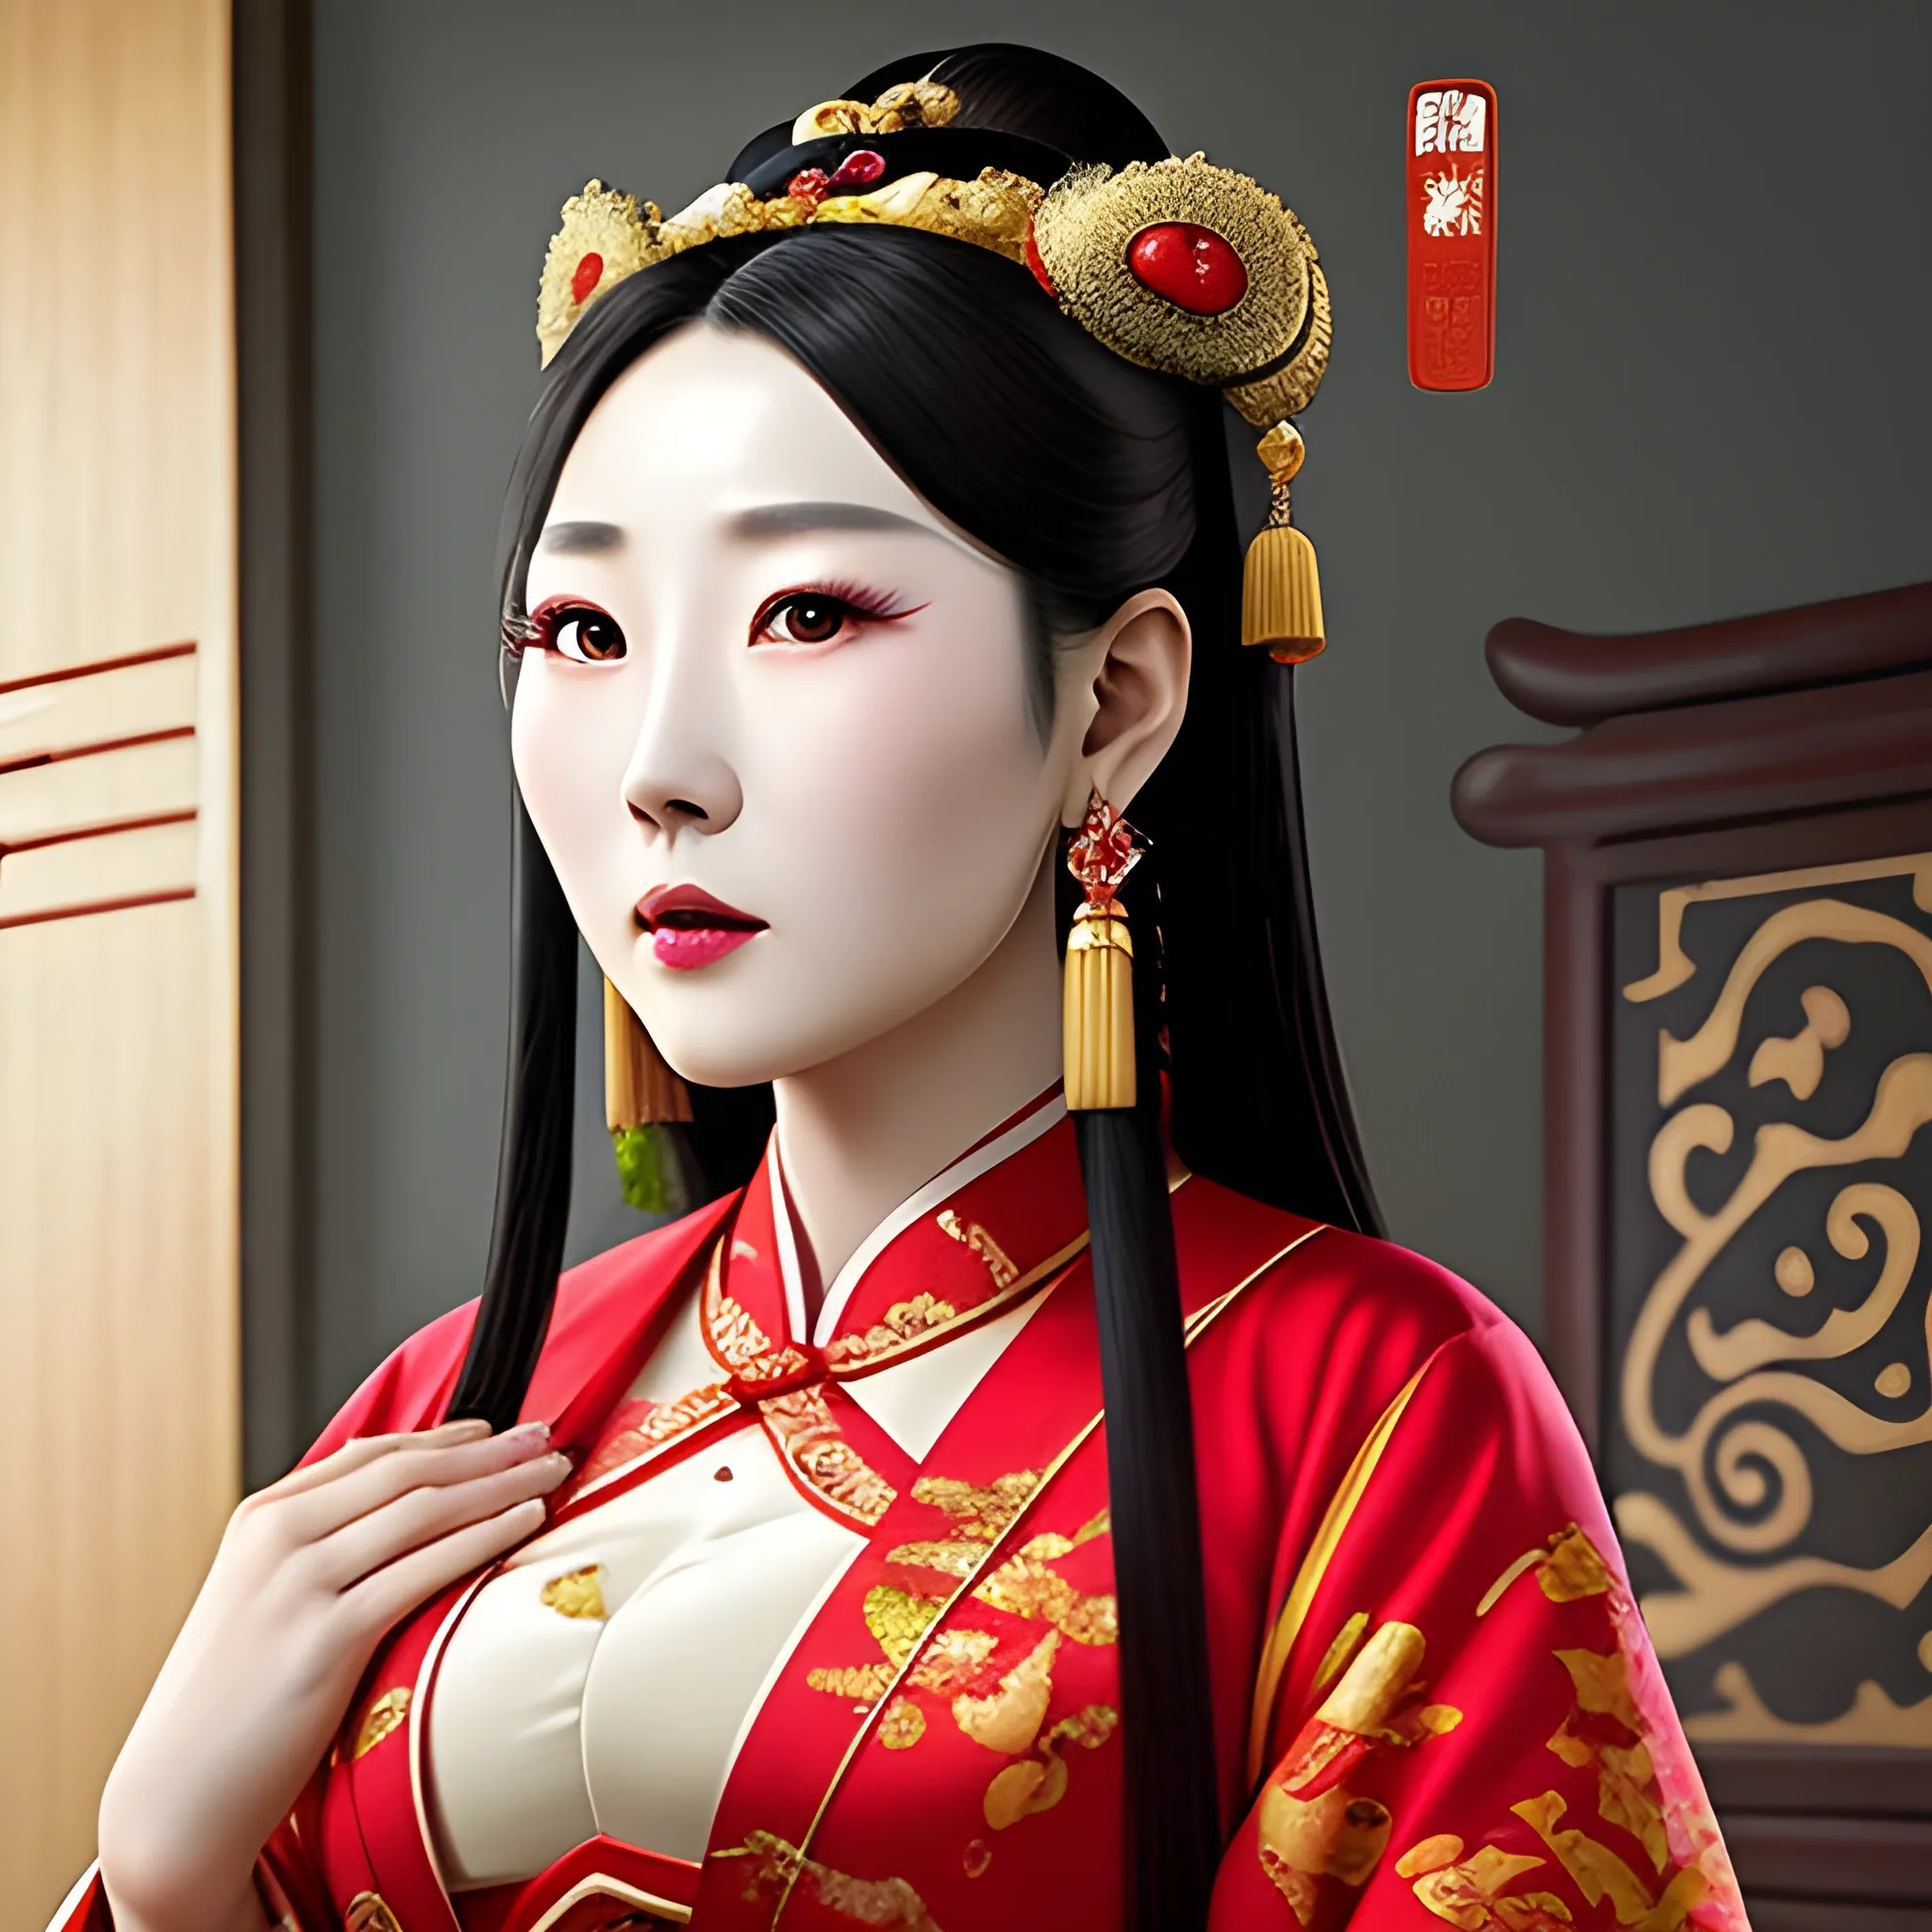 Liu Chuyu, the chief princess of Kuaiji, indulges in lust and promiscuity, and hides her male favorite
